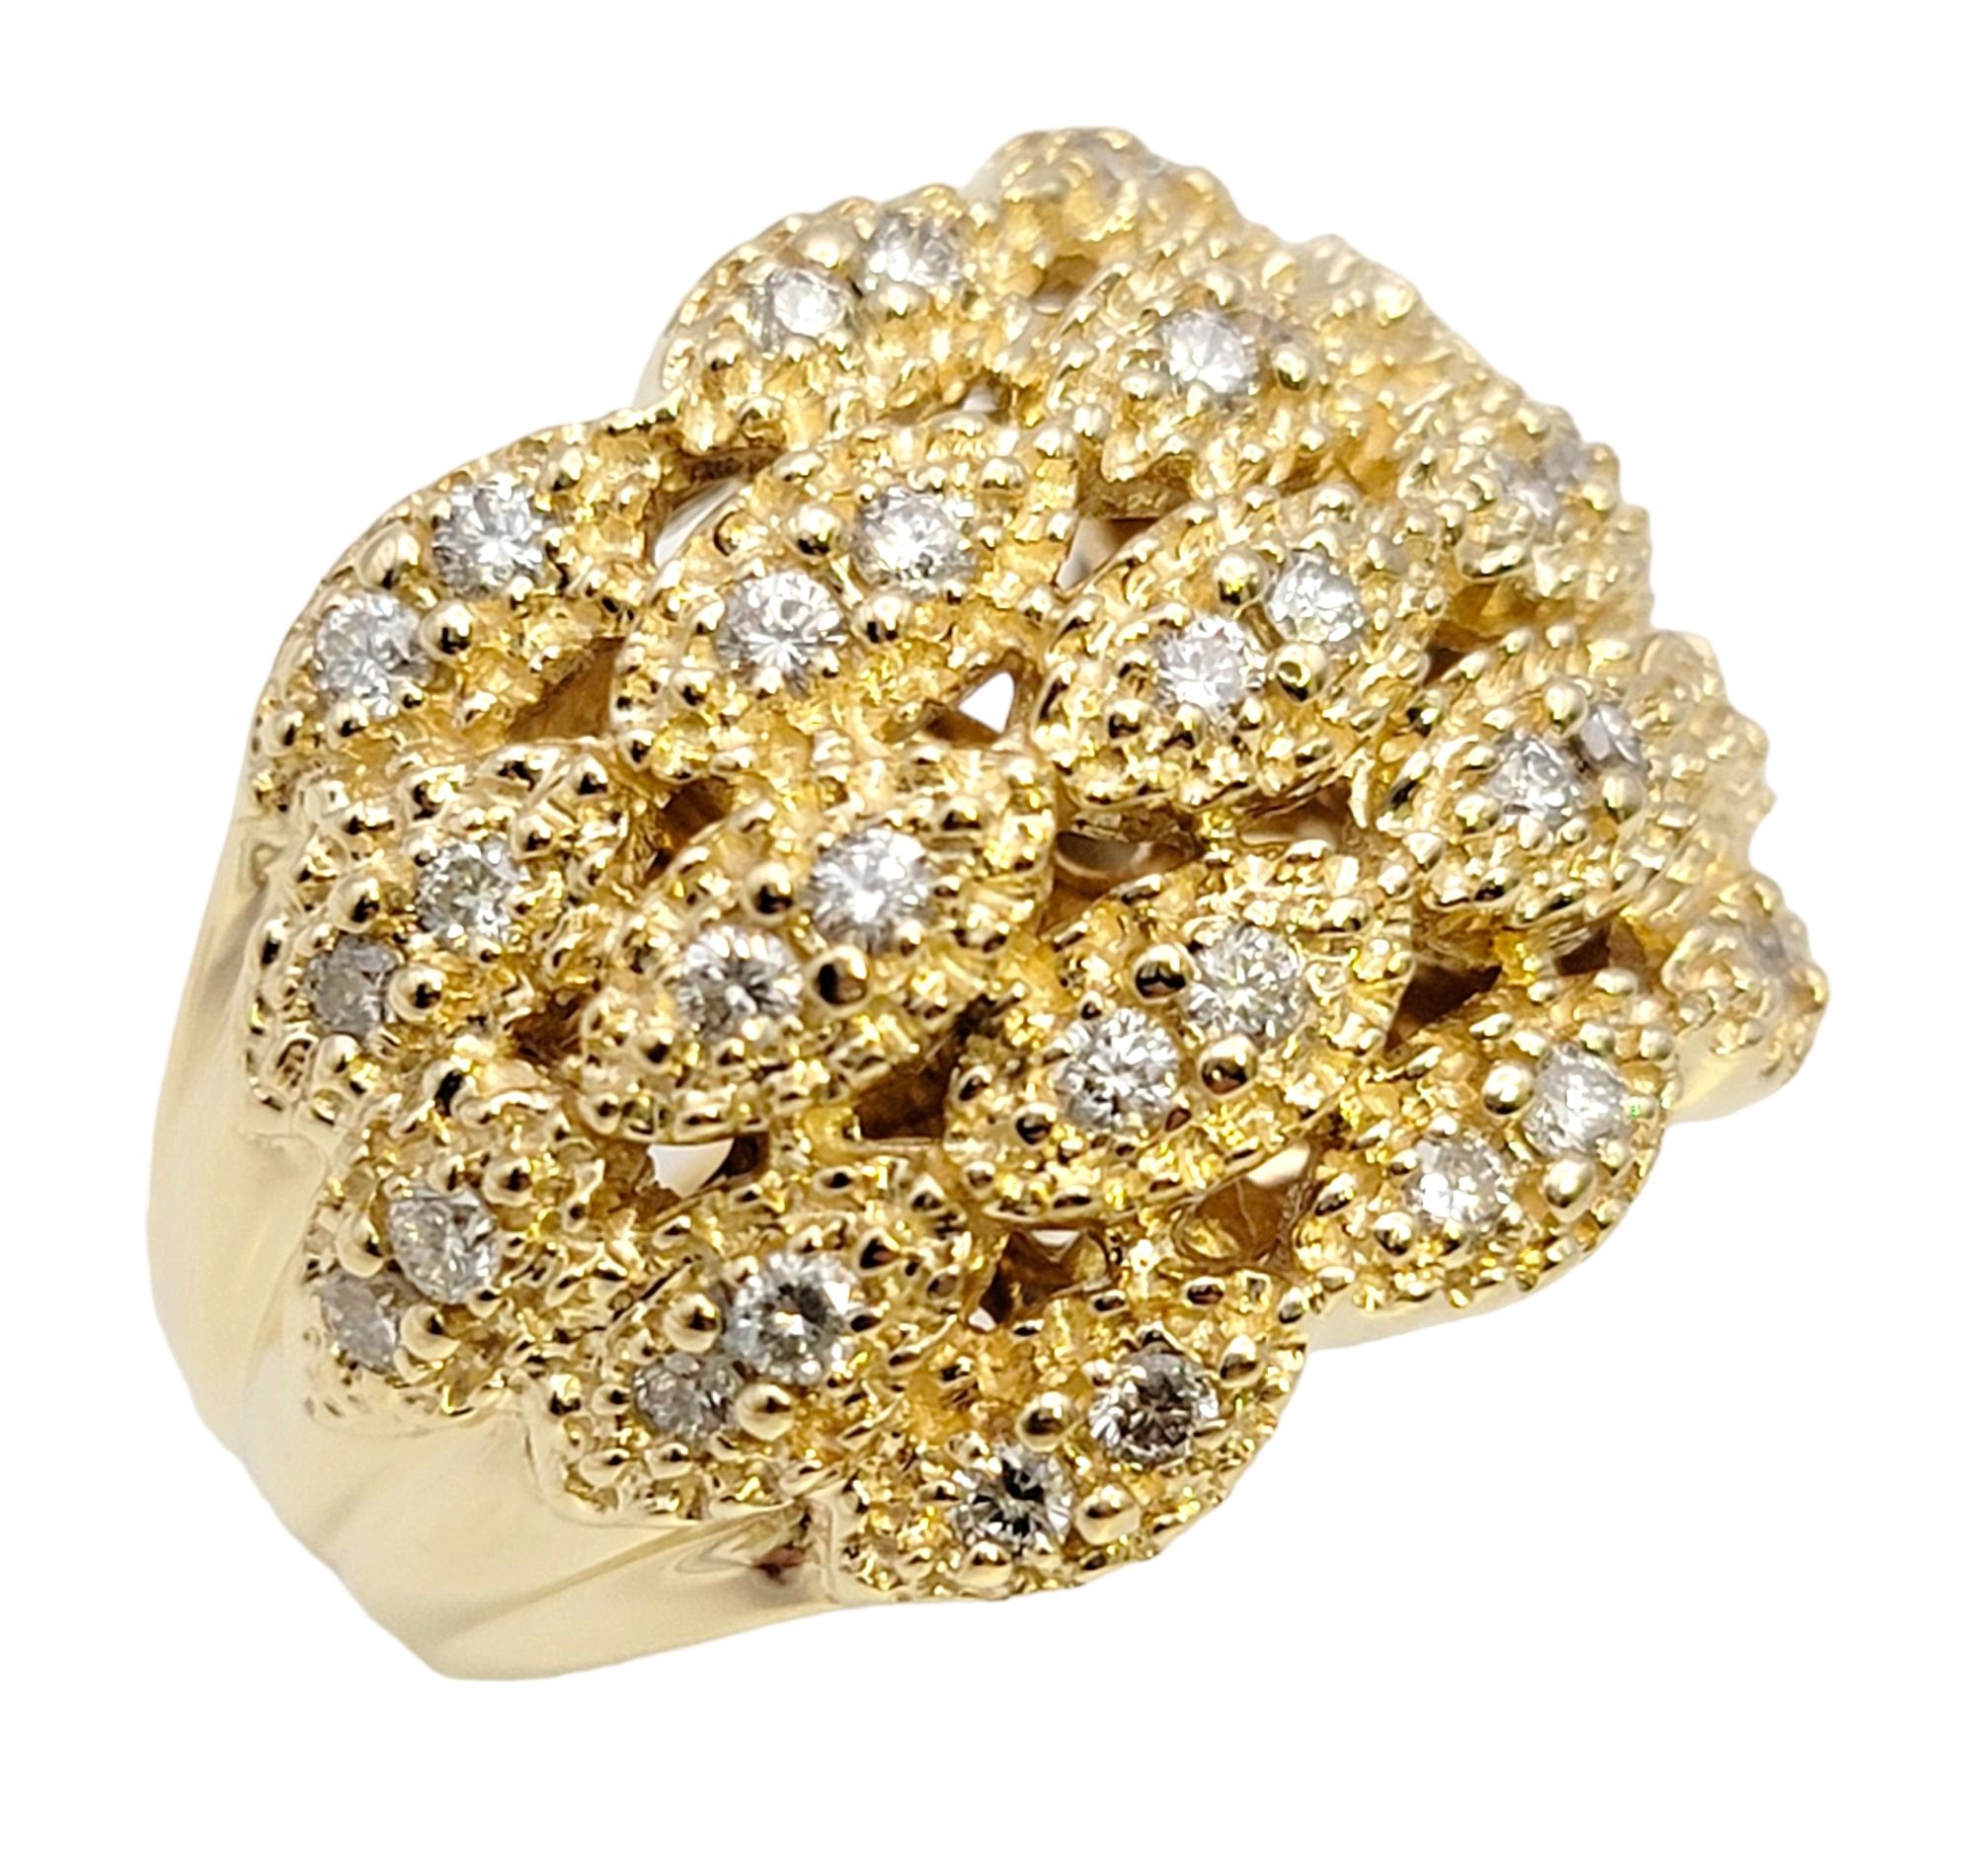 Ring size: 6.75

This beautifully textured diamond dome ring from Sonia B. Designs absolutely lights up the finger. The shimmering stones will fill your finger from end to end with sensational sparkle, making an incredible statement piece that you